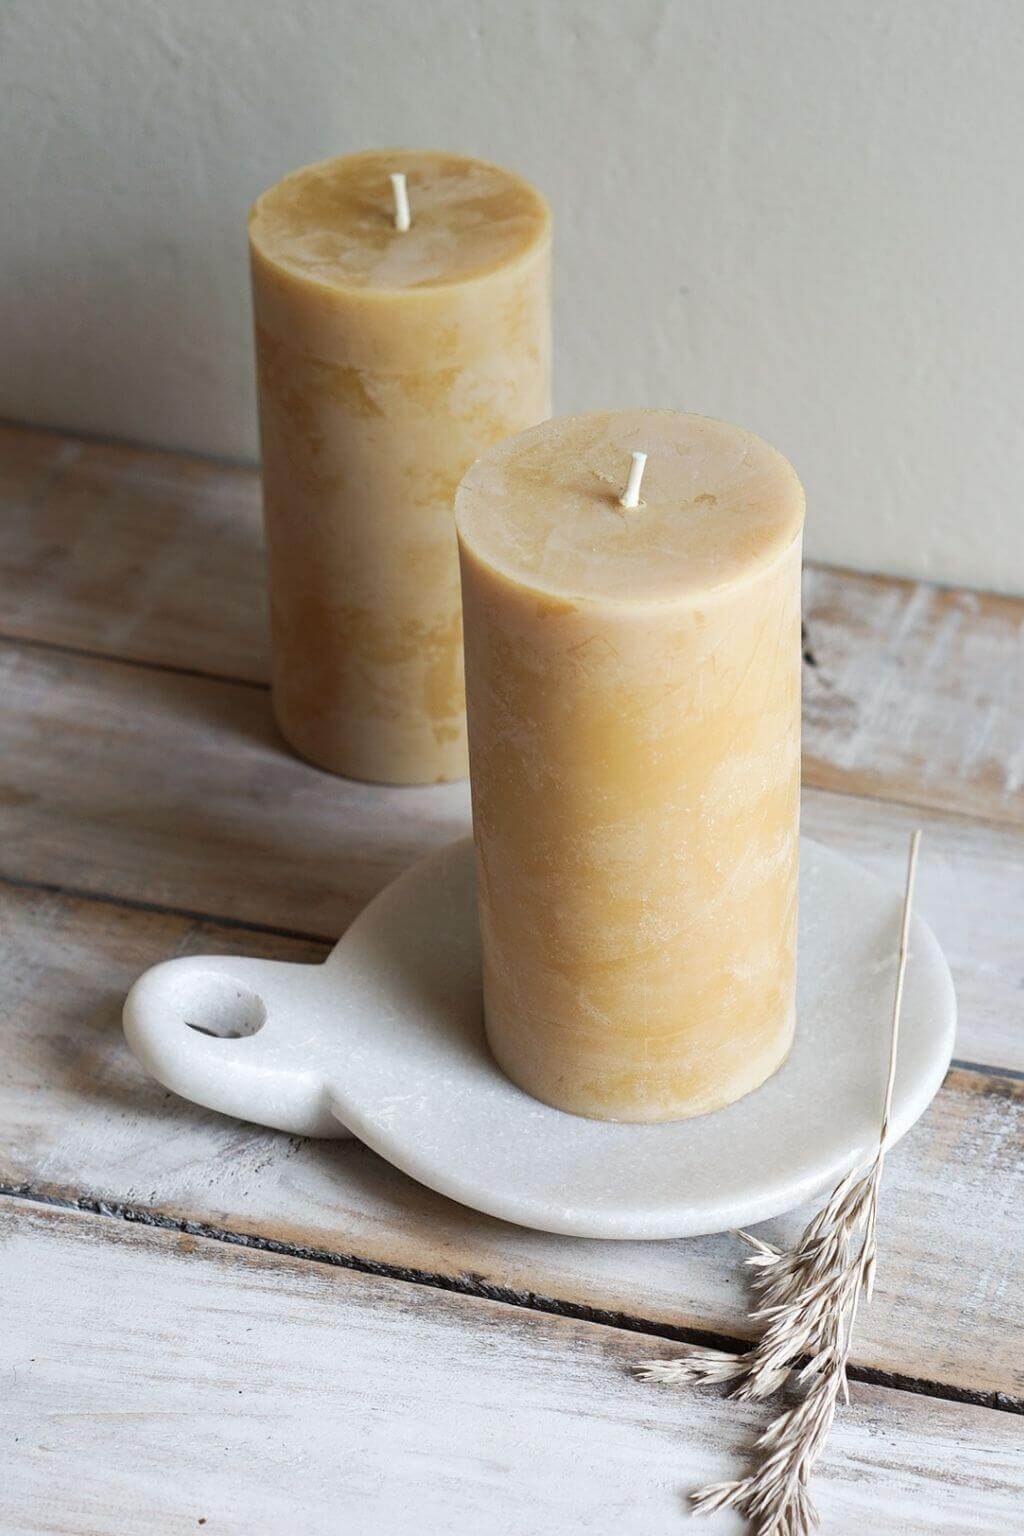 Pure Beeswax Pillar Candle, 100 hour